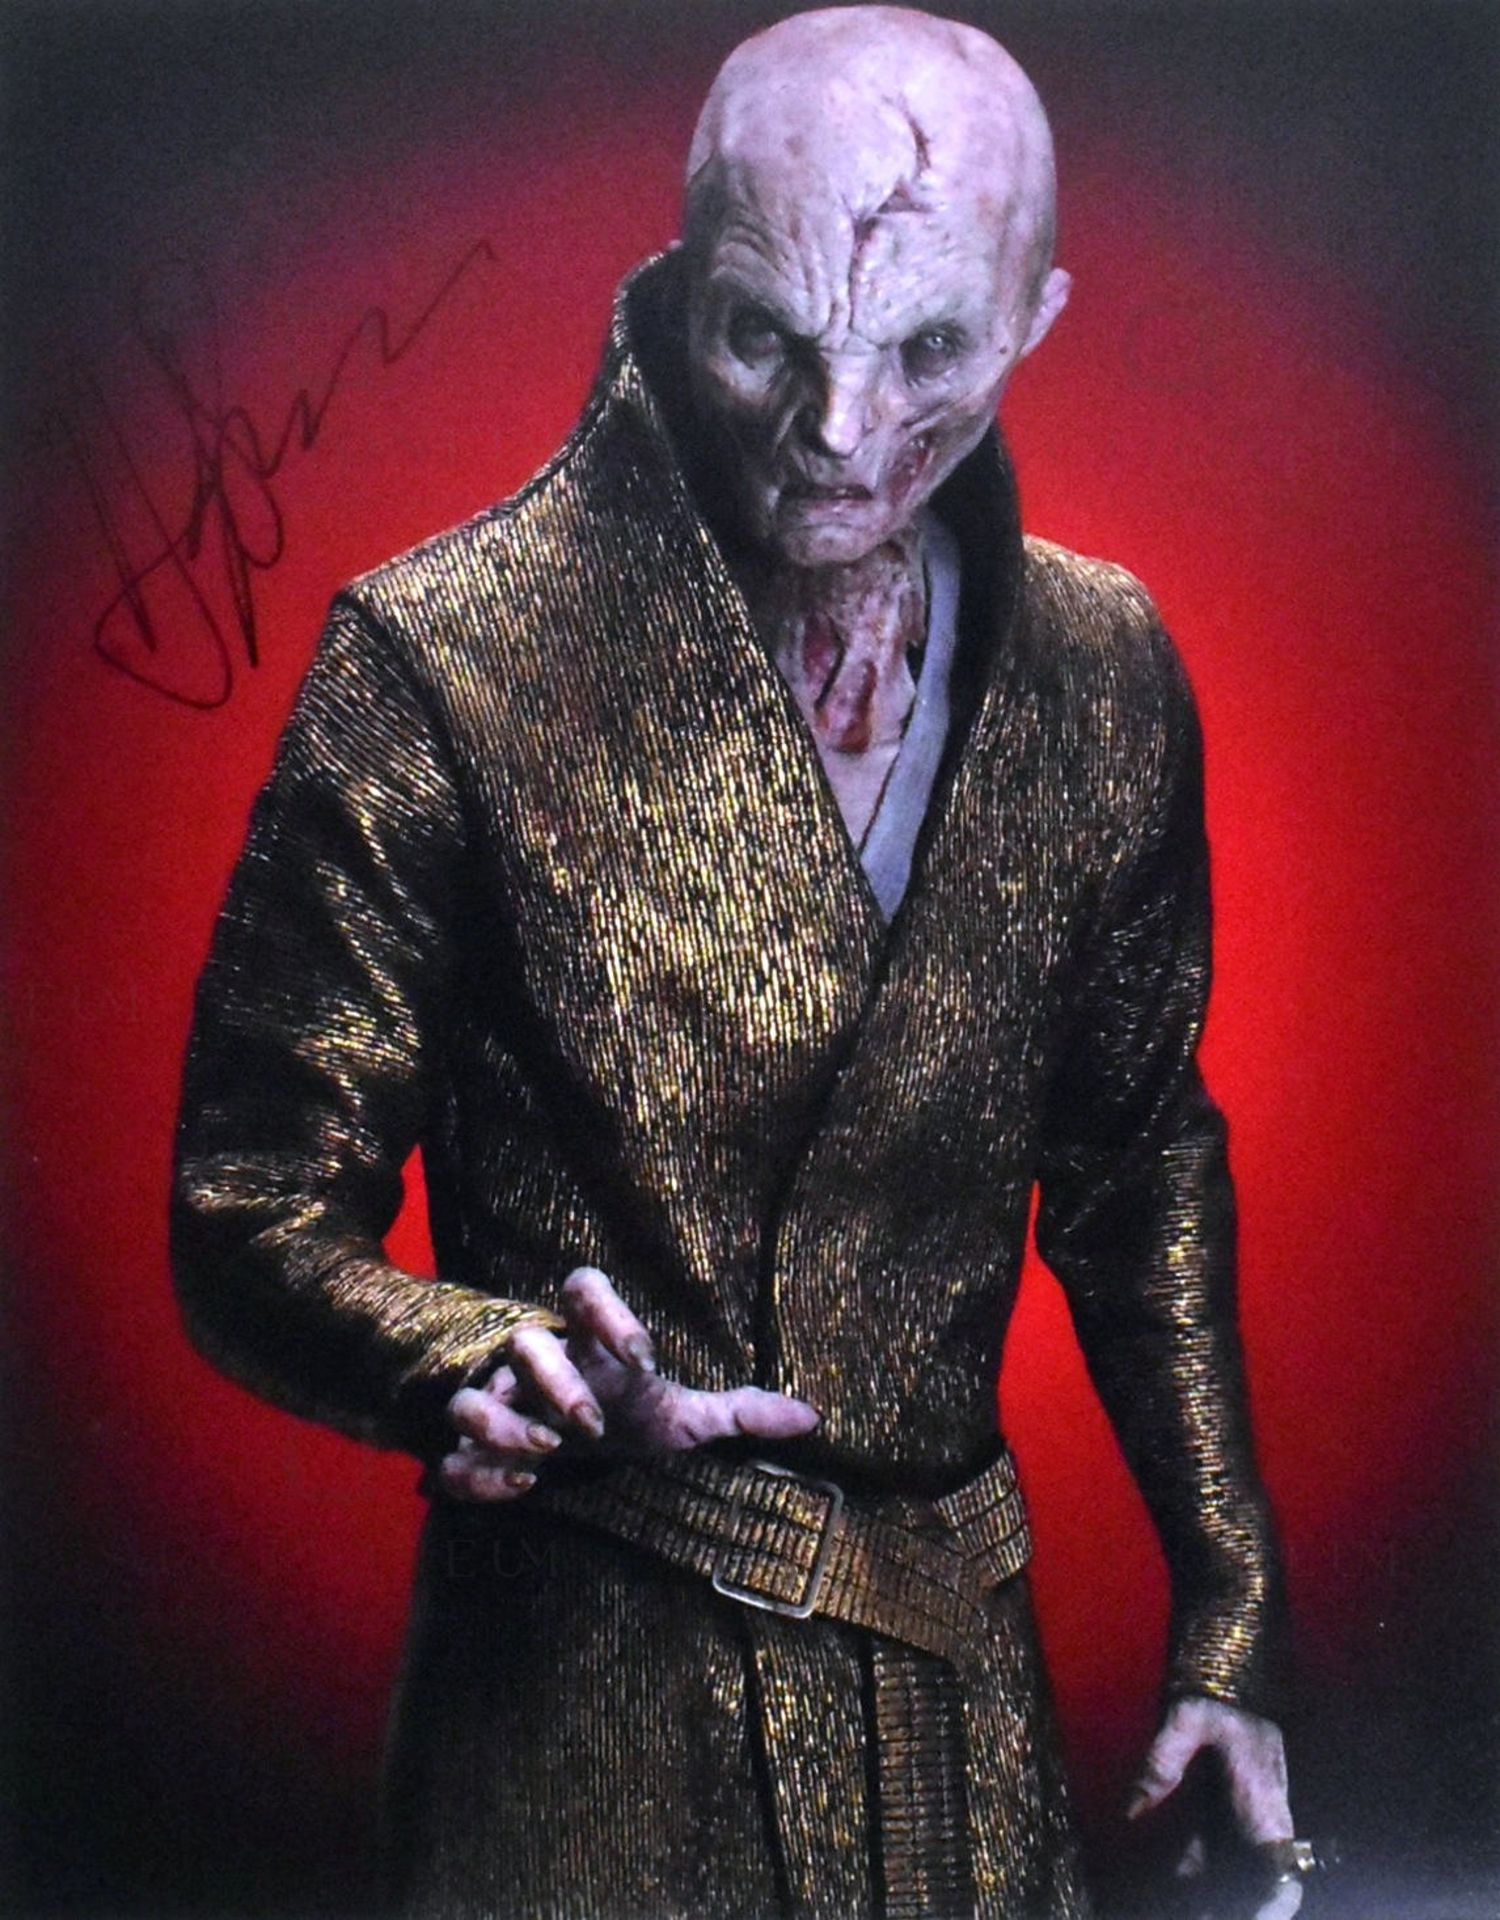 STAR WARS - ANDY SERKIS - AUTOGRAPHED 8X10" PHOTO - AFTAL